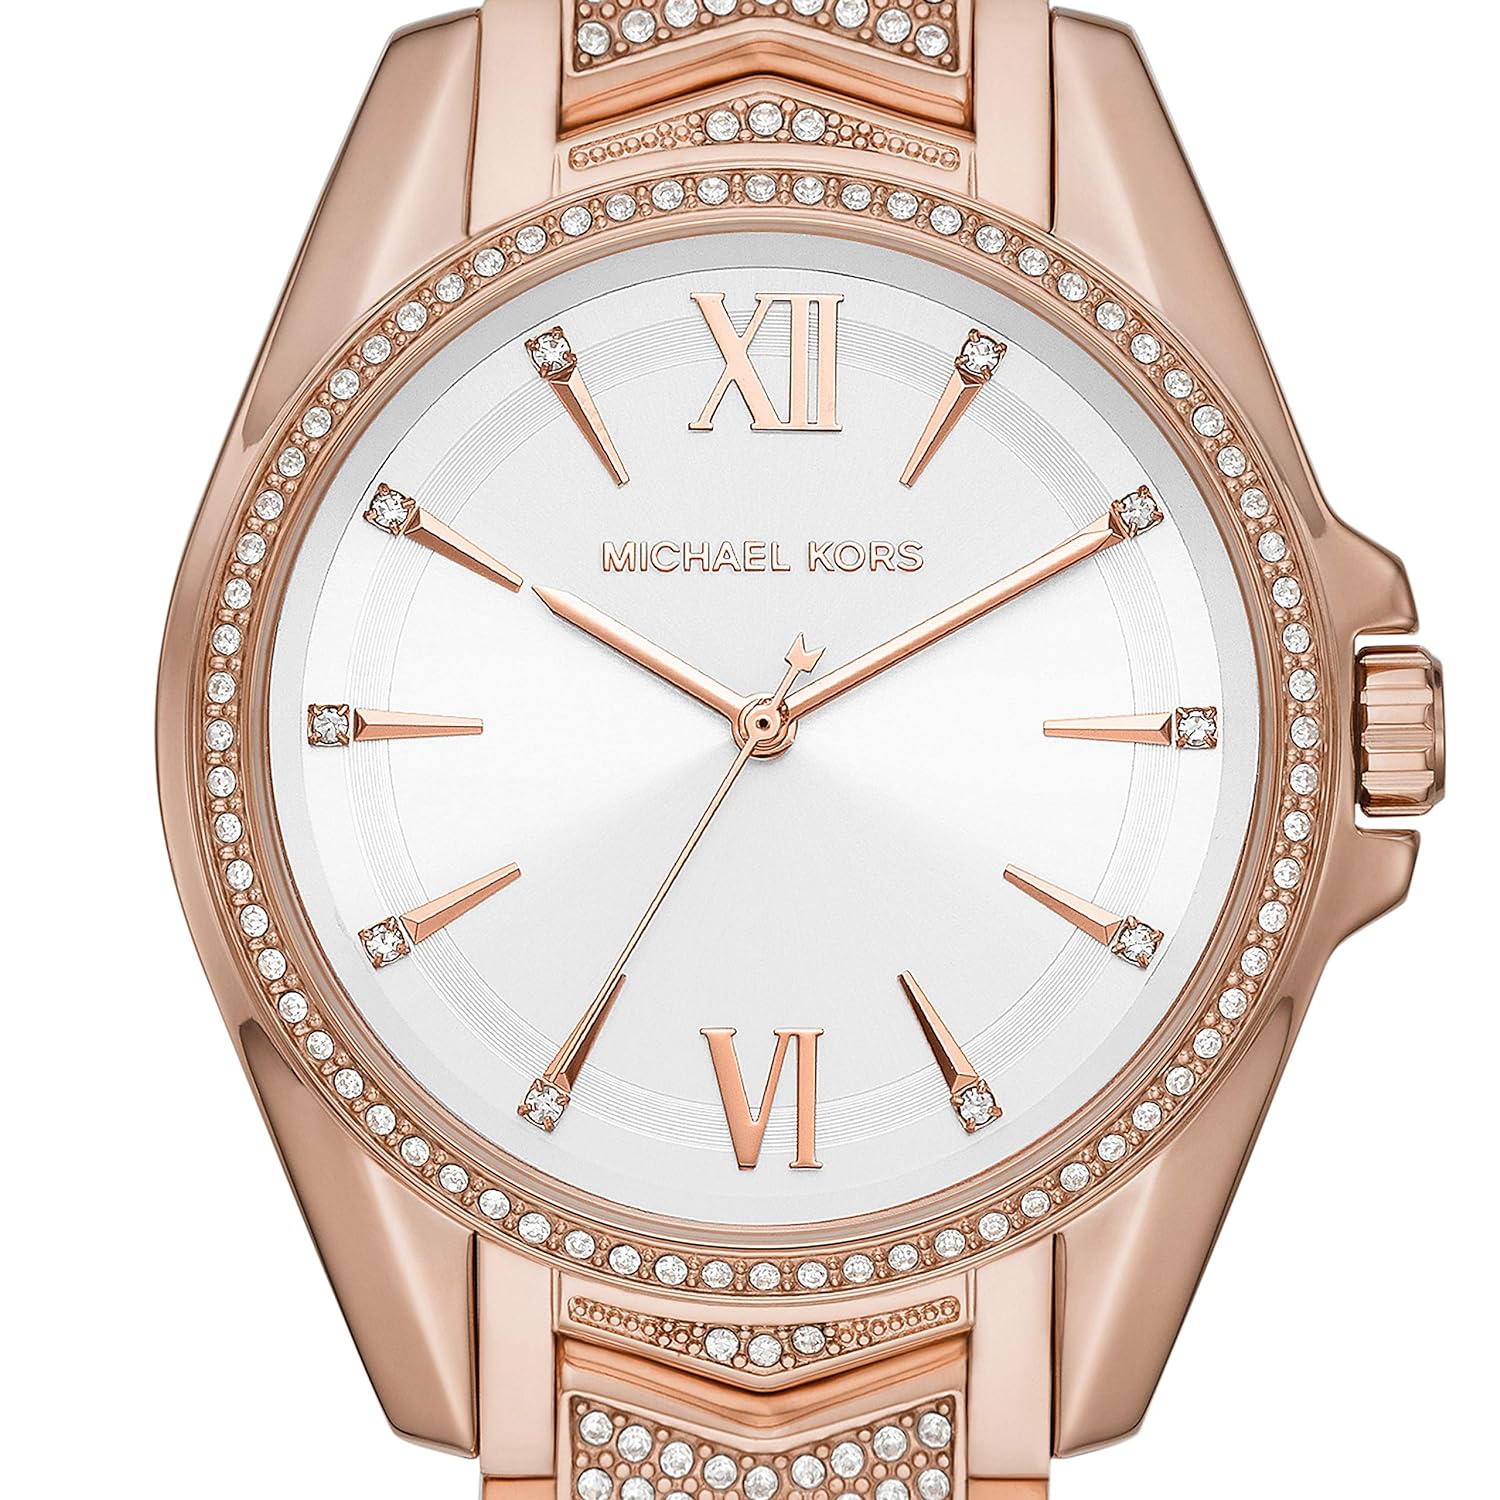 ĐỒNG HỒ ĐEO TAY DÂY KIM LOẠI MICHAEL KORS WHITNEY STAINLESS STEEL ANALOGUE WATCH MK6858 5